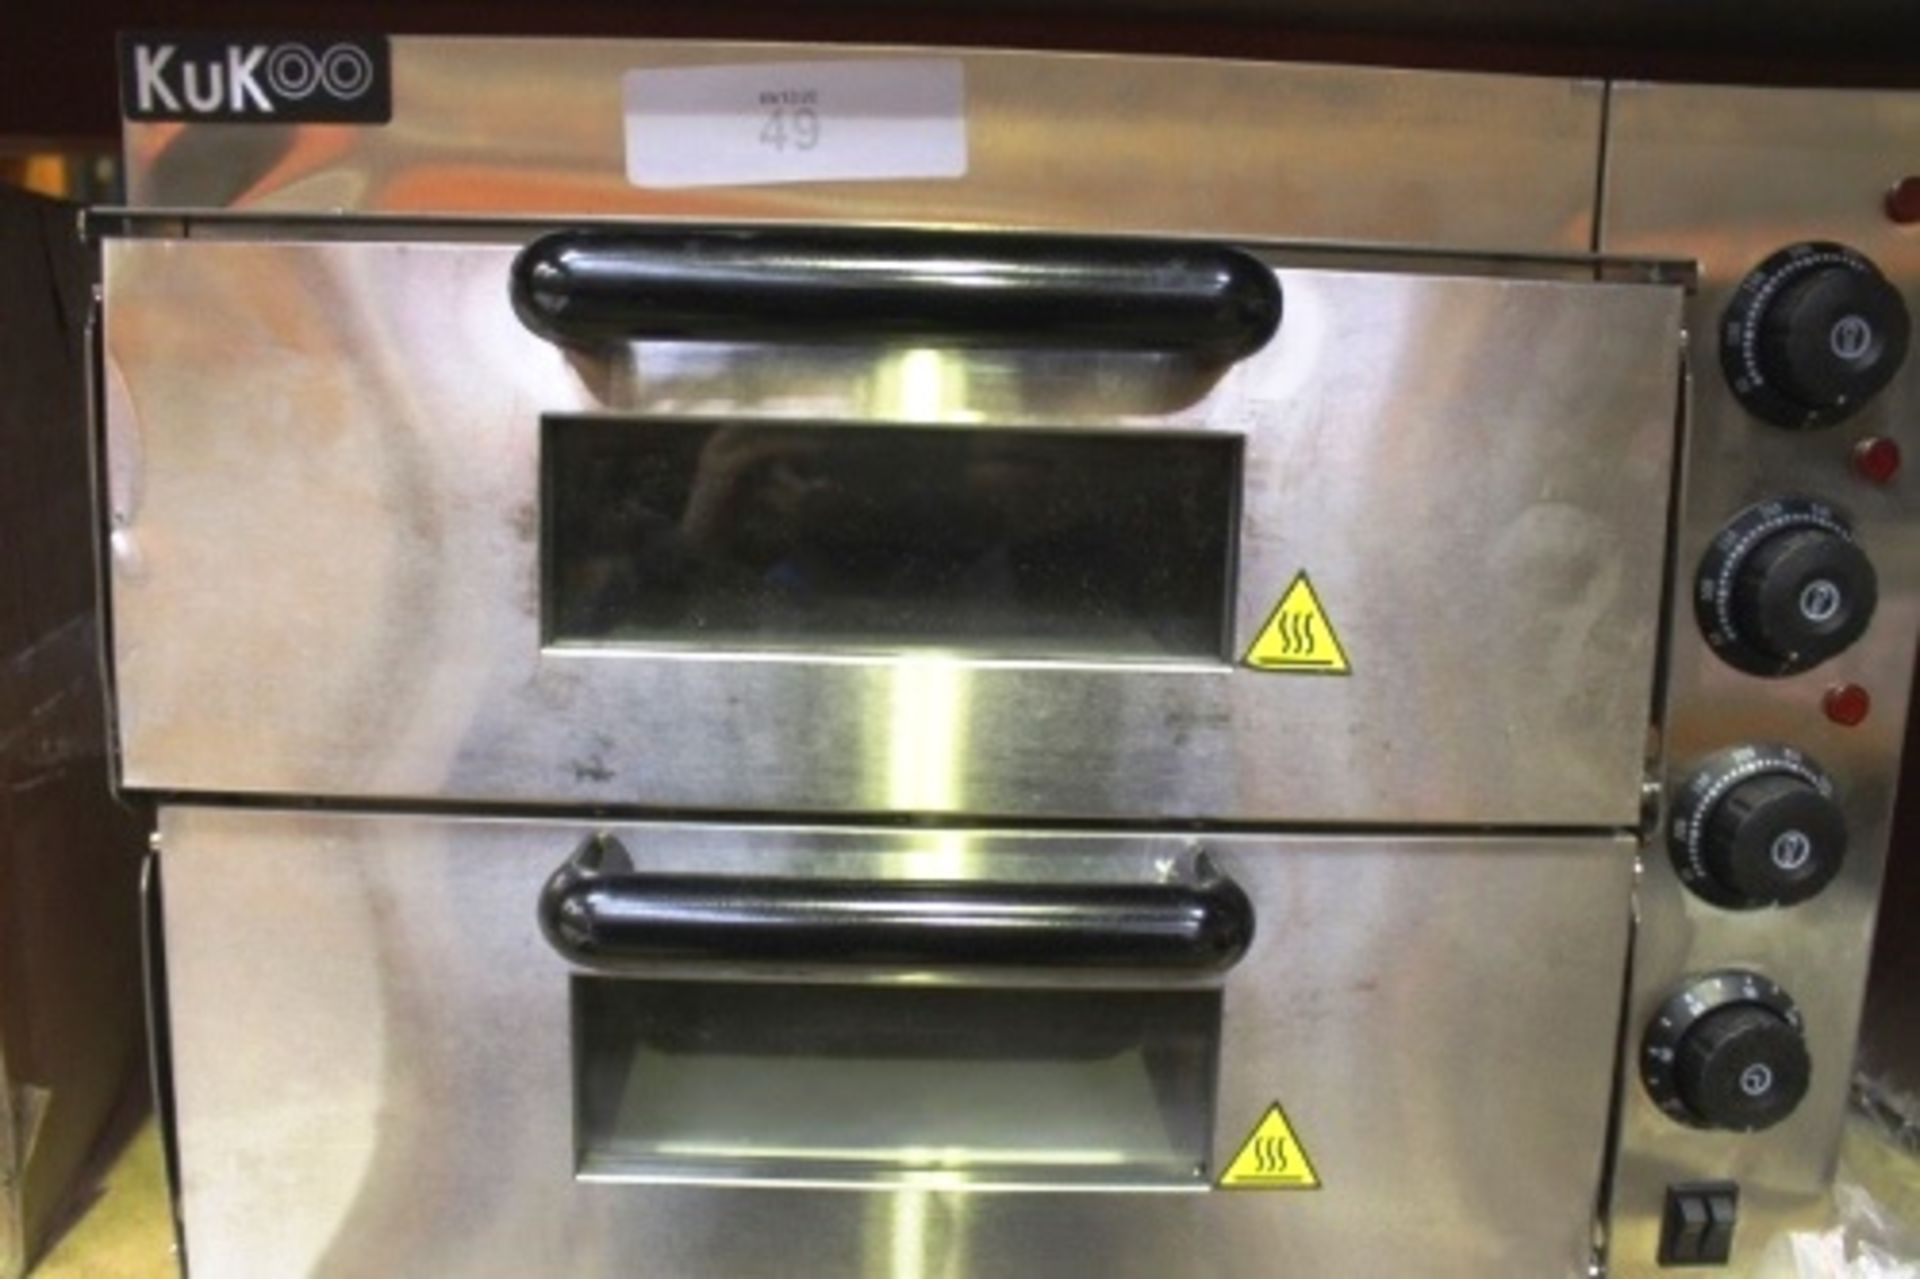 An Kukpp double pizza oven, model KPIZ40B, dents to outside case, customer return - Spares and